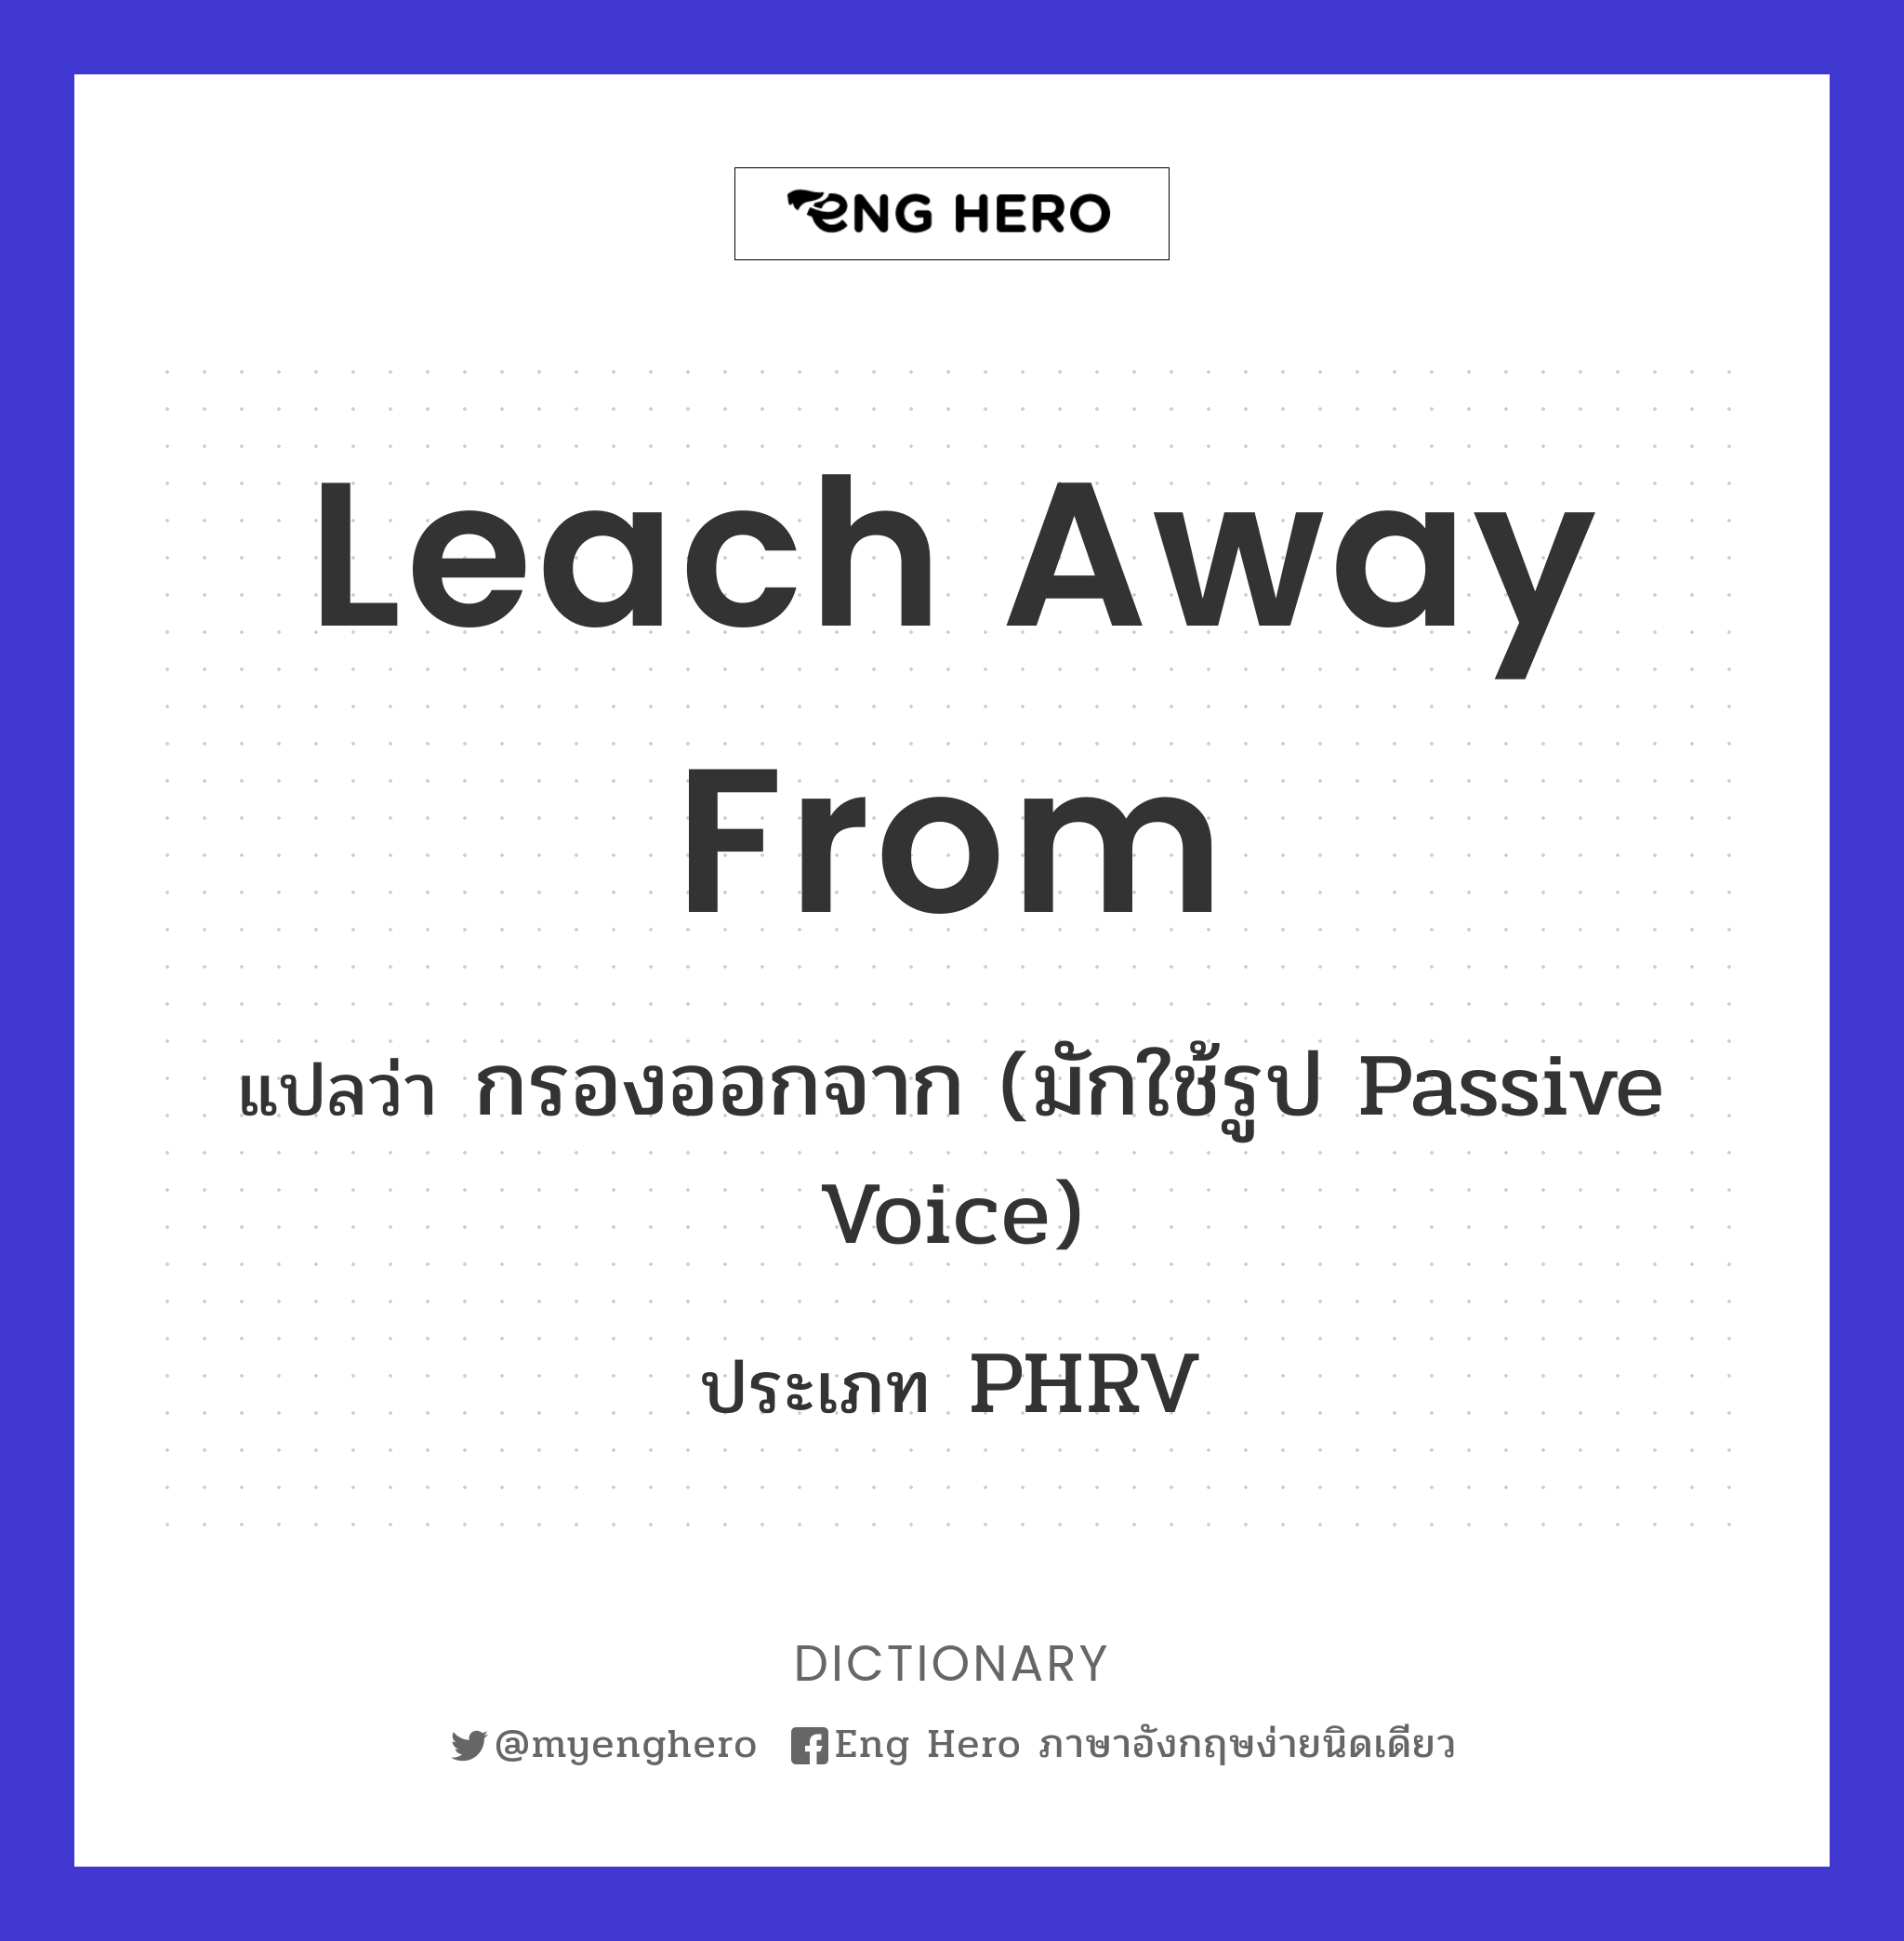 leach away from